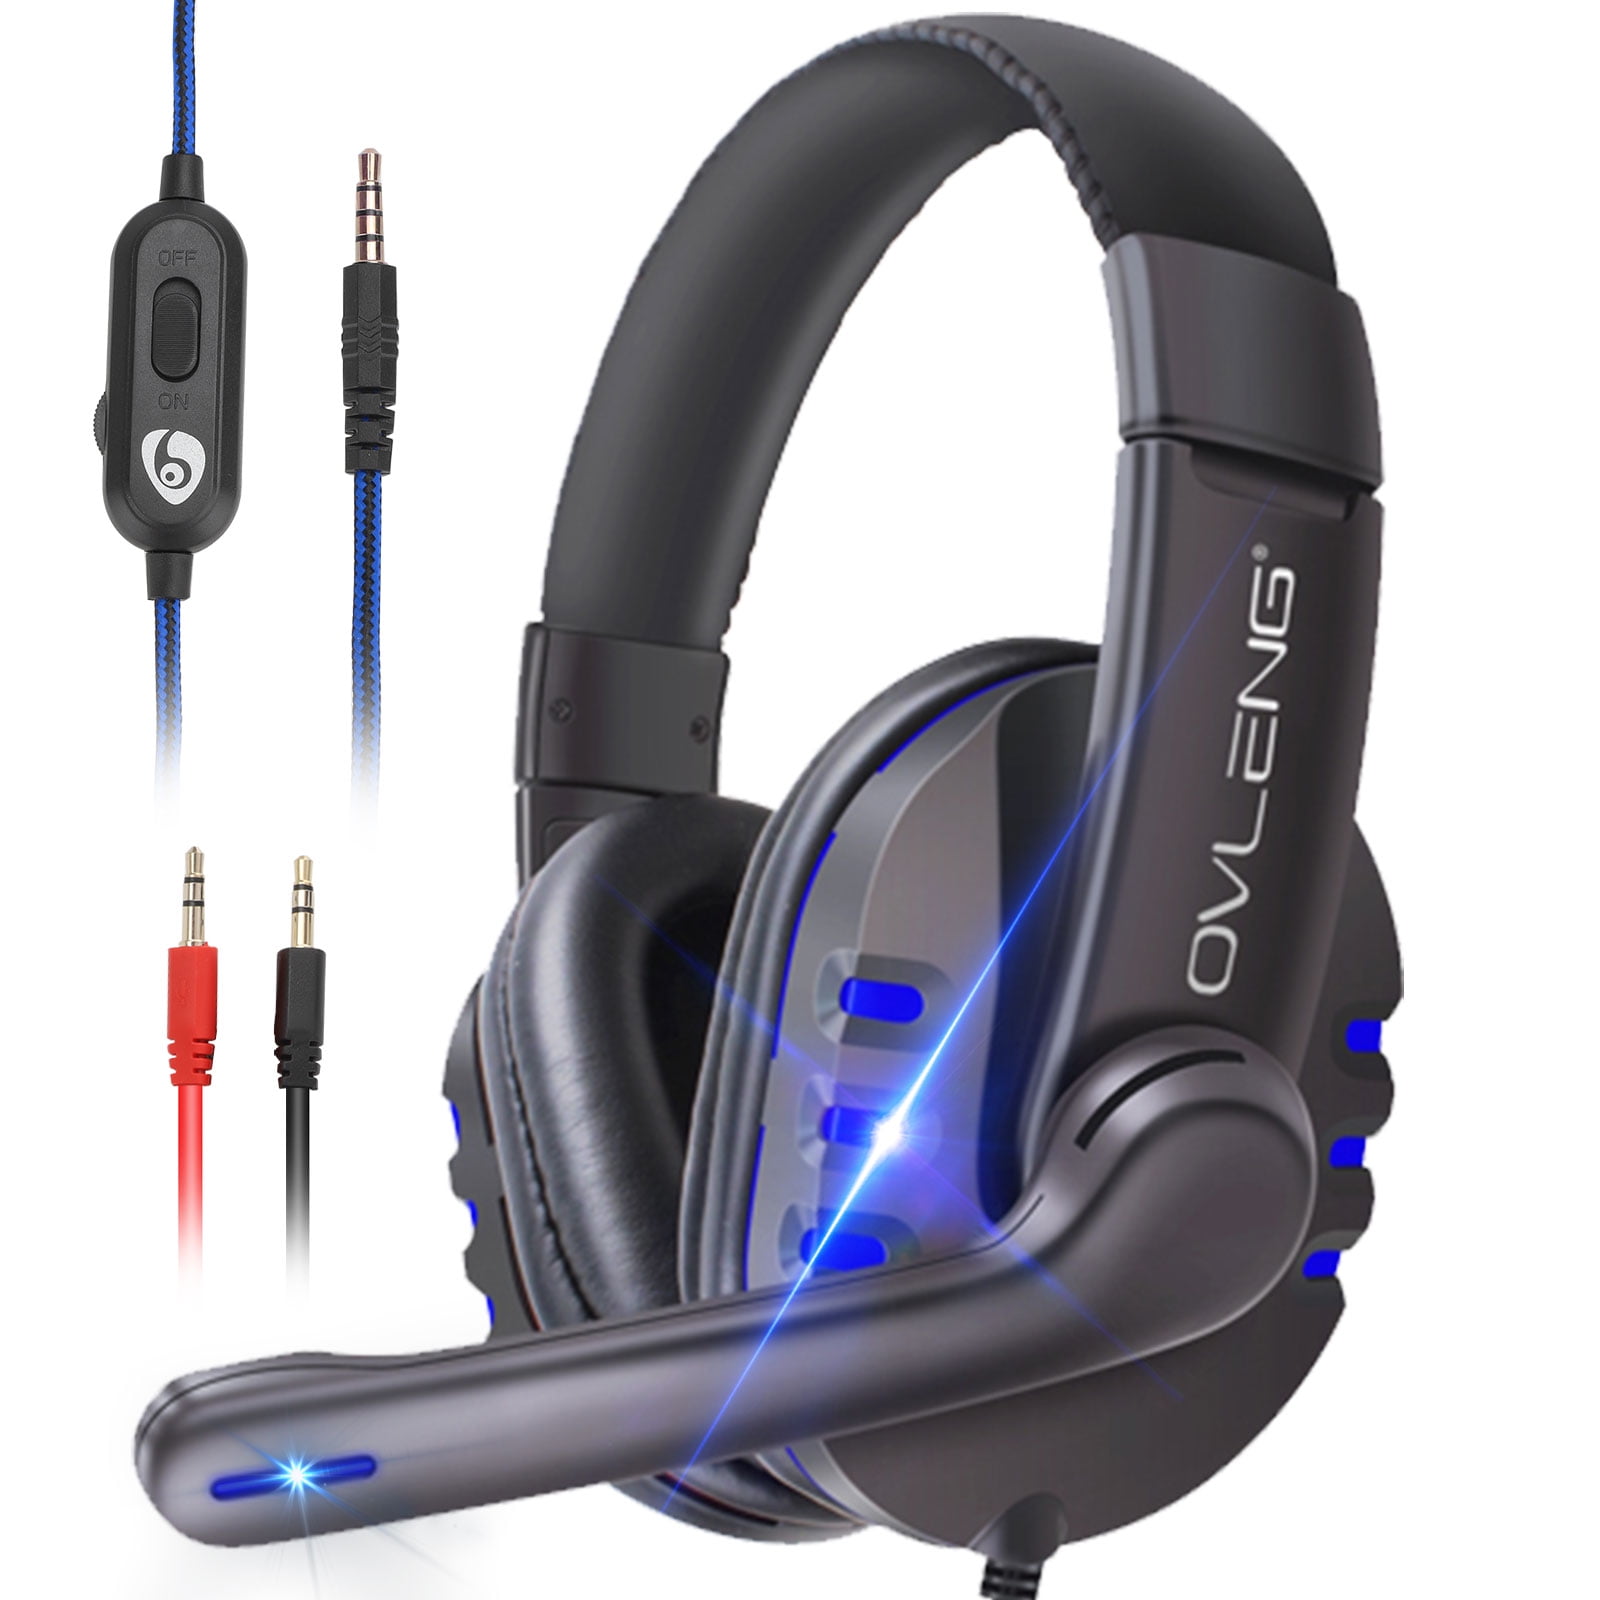 Bblue Gaming Headset Xbox one Headset with Mic Stereo Gaming Headset Noise Immunity Swivel Mic & LED Light Suspension Headband PS4 VR Headphone Compatible with PC PS5 Xbox One 